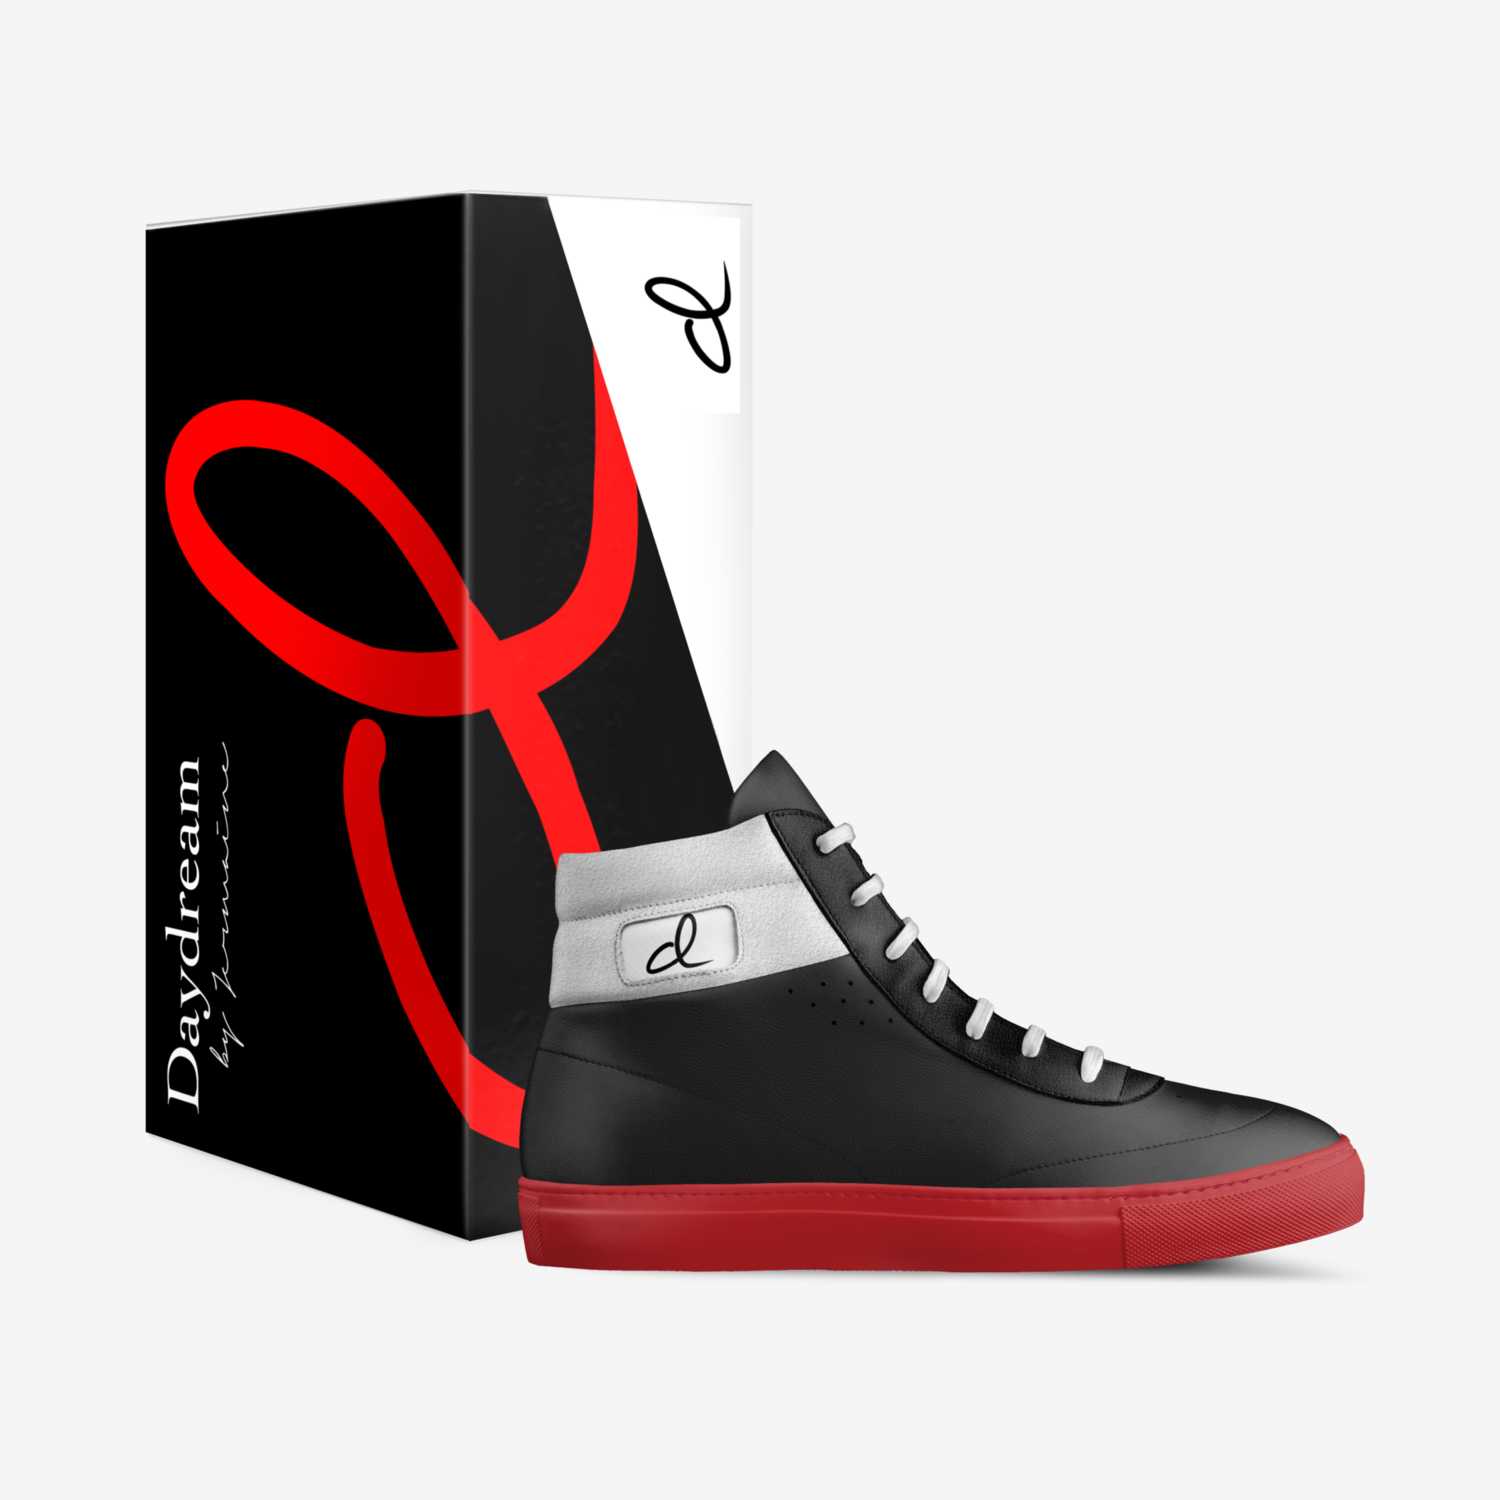 Daydream custom made in Italy shoes by Jermaine James | Box view